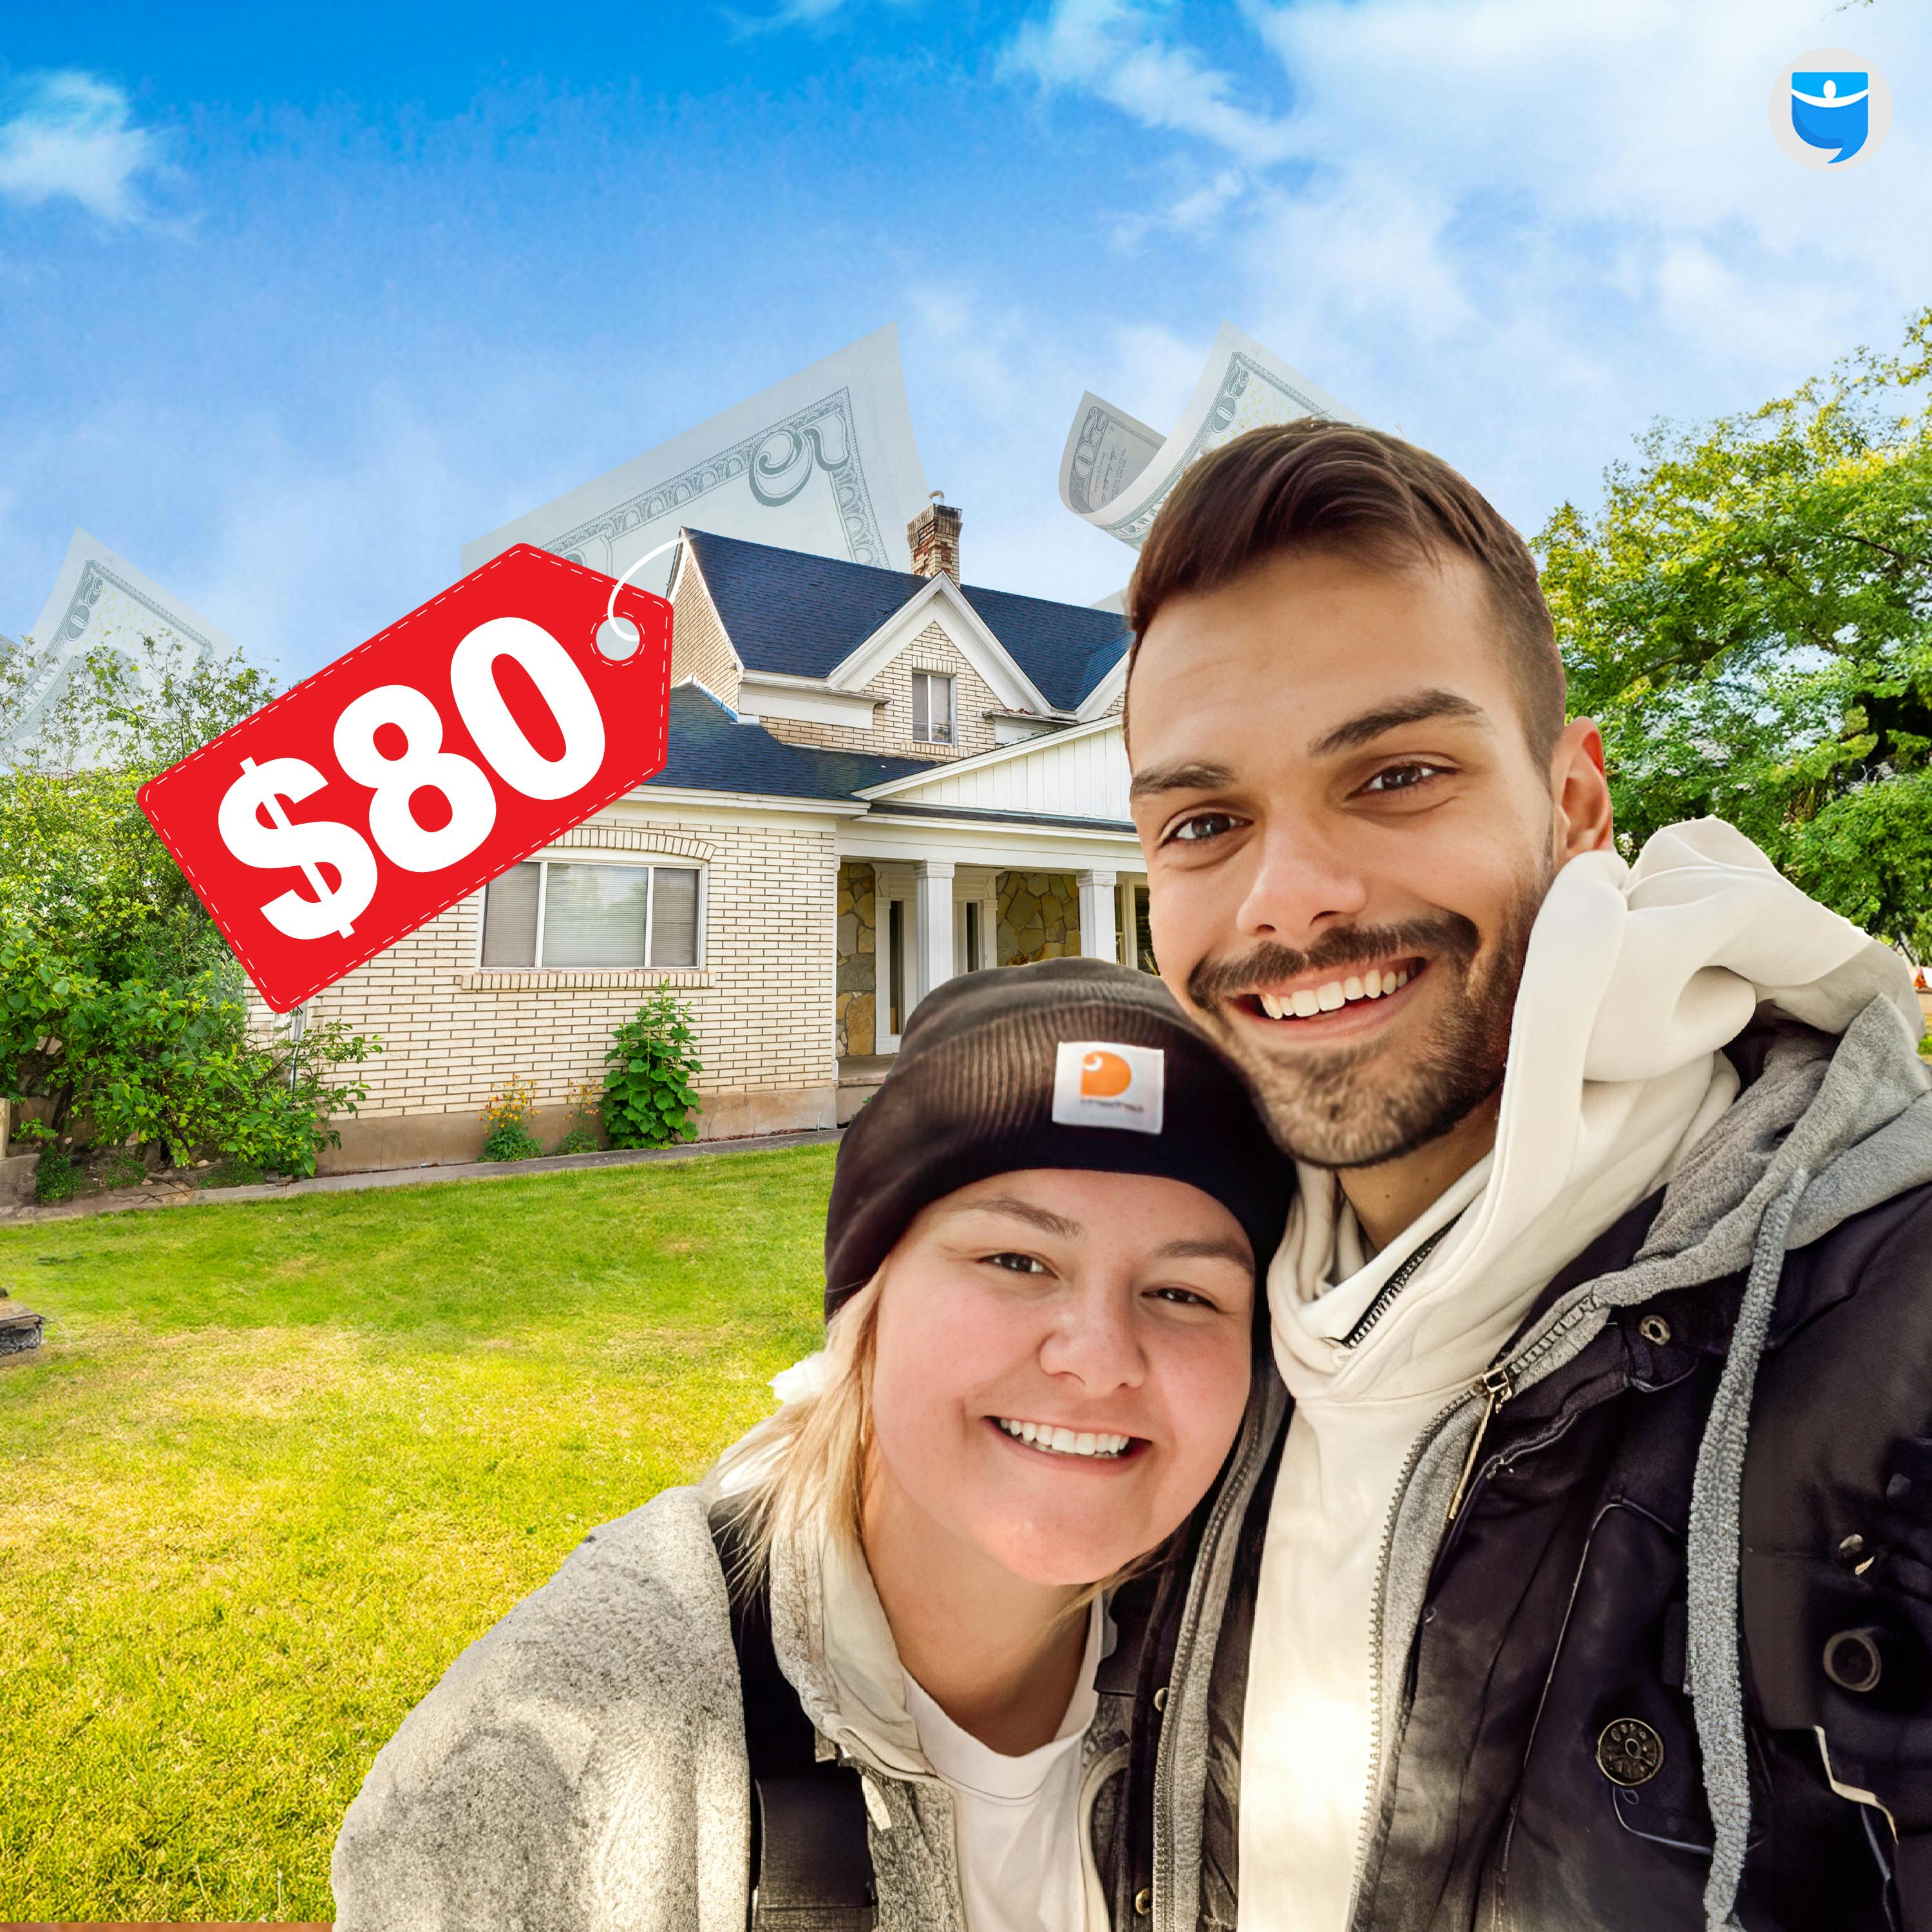 329: Buying a Rental Property for $80 with This Loan w/Clint Campbell